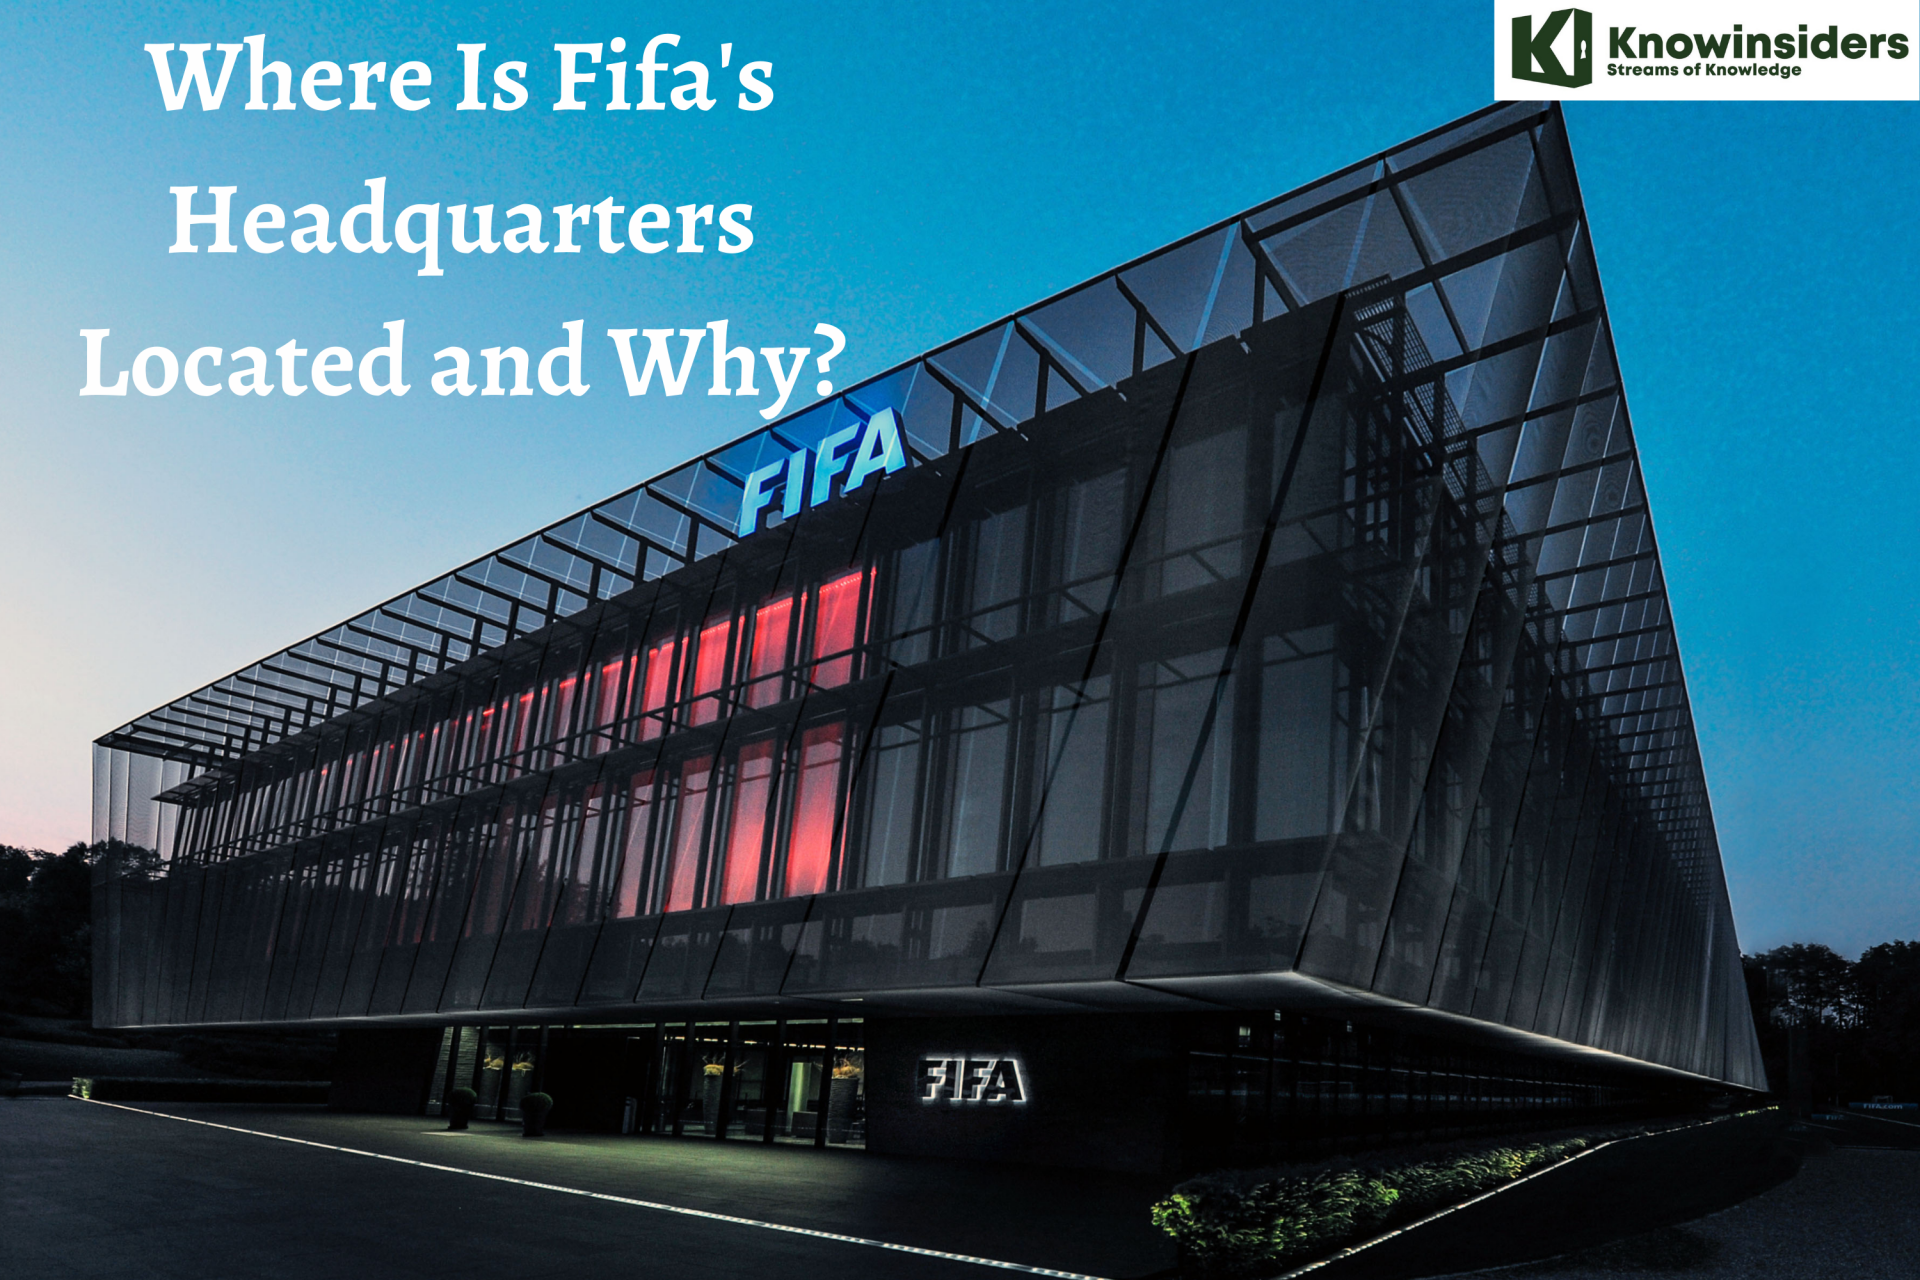 Where Is Fifa's Headquarter Located and Why?